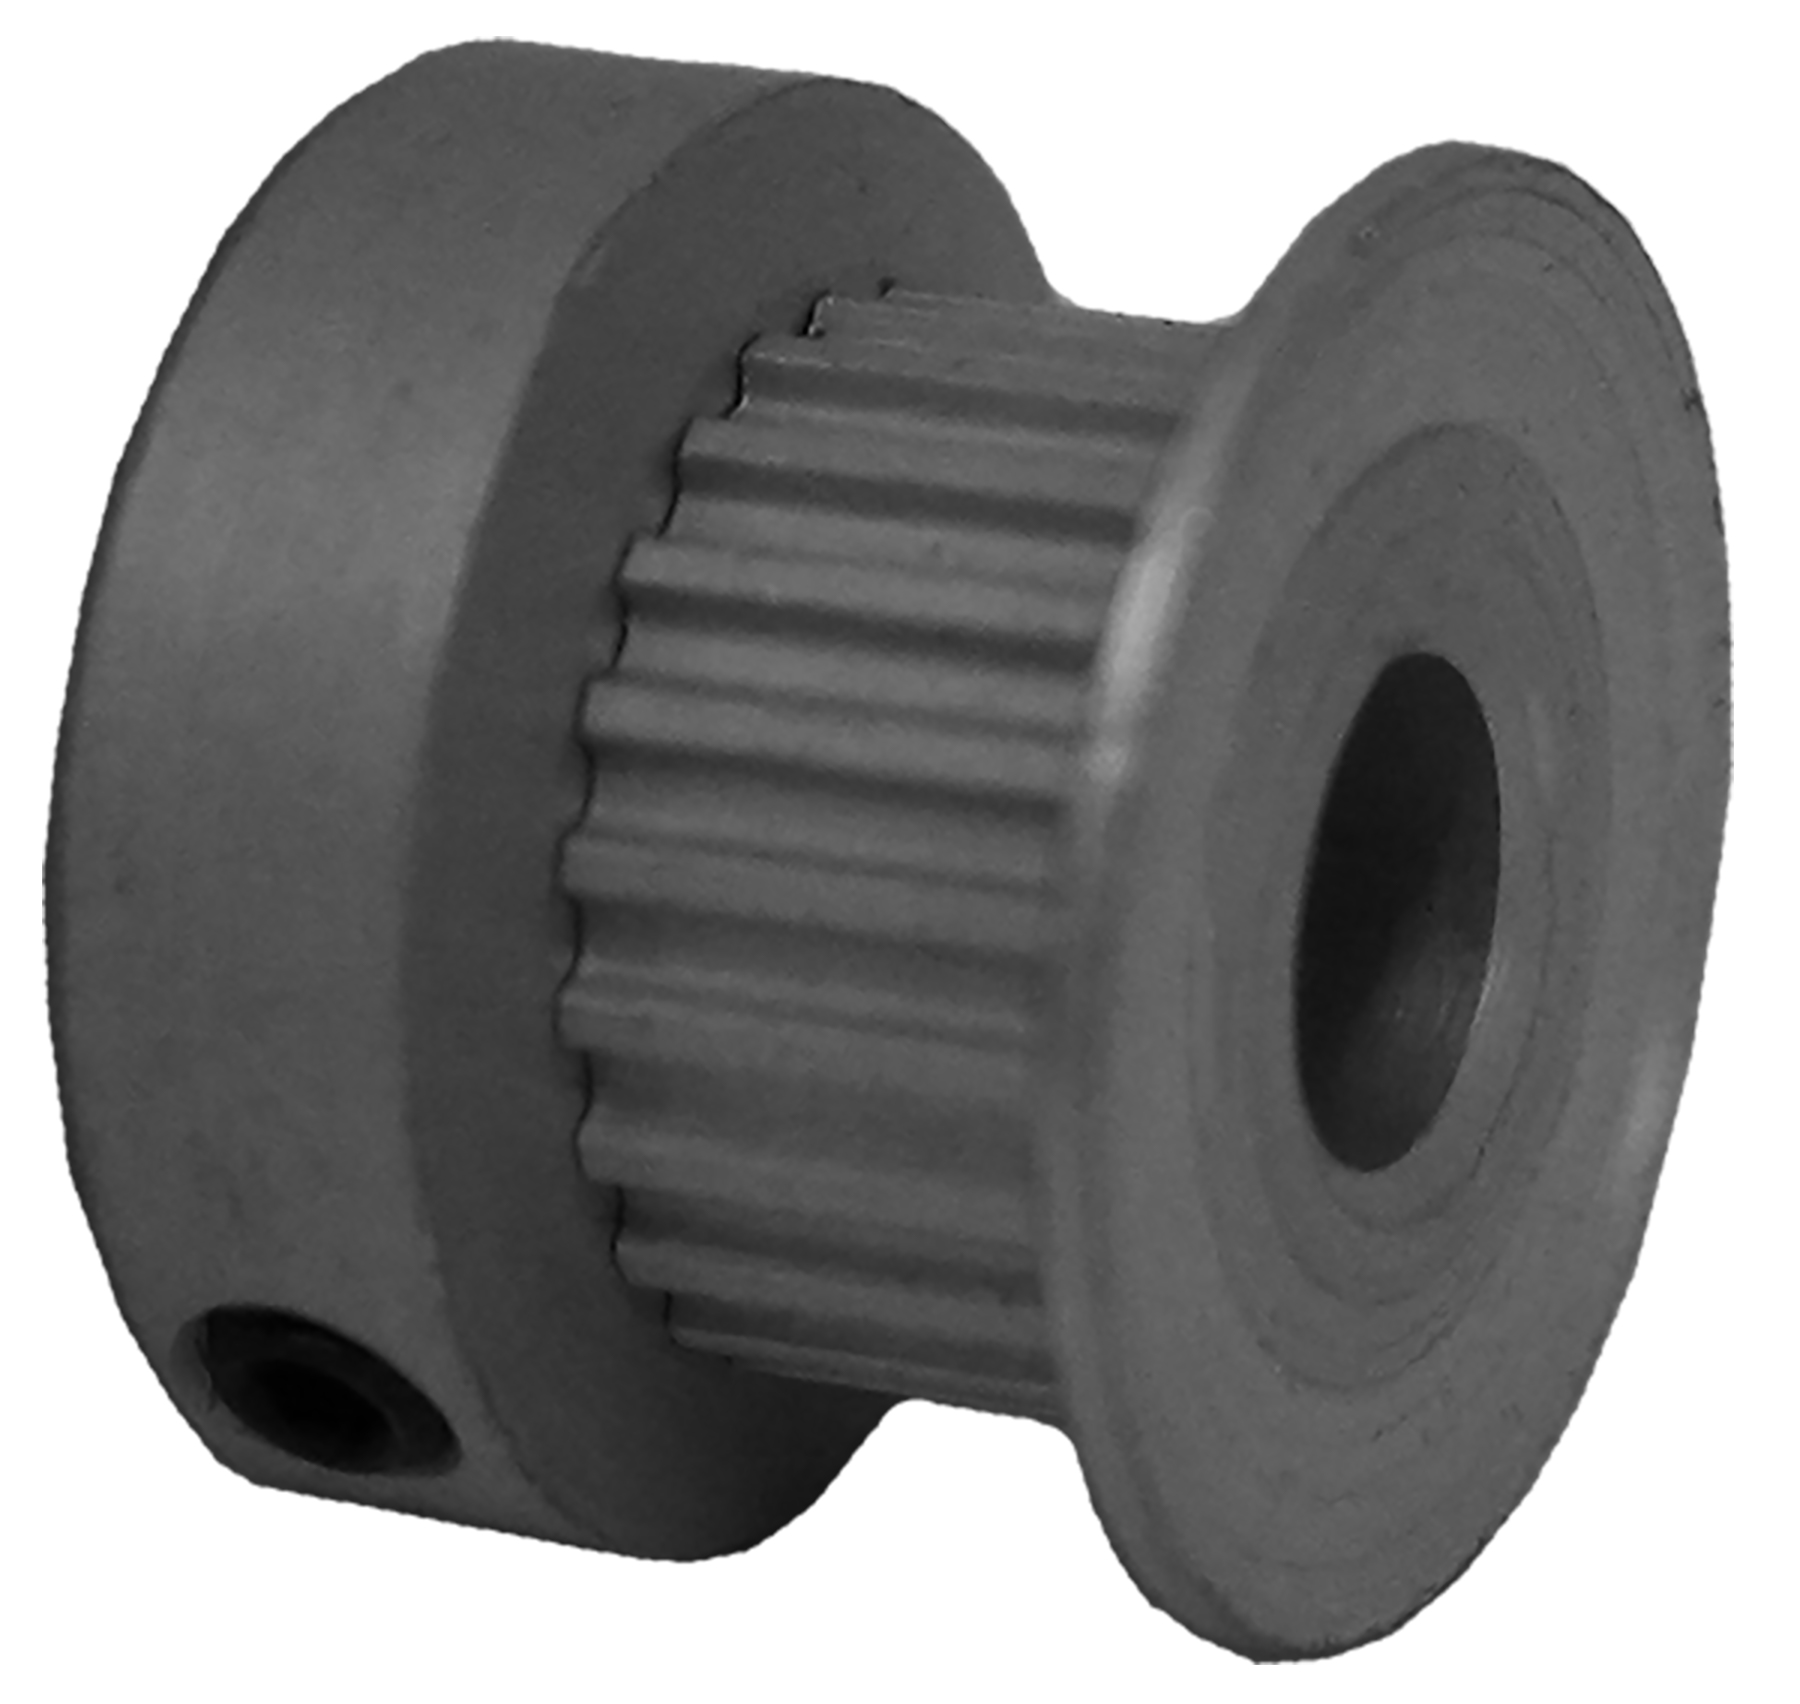 22MP025-6CA3 - Aluminum Imperial Pitch Pulleys